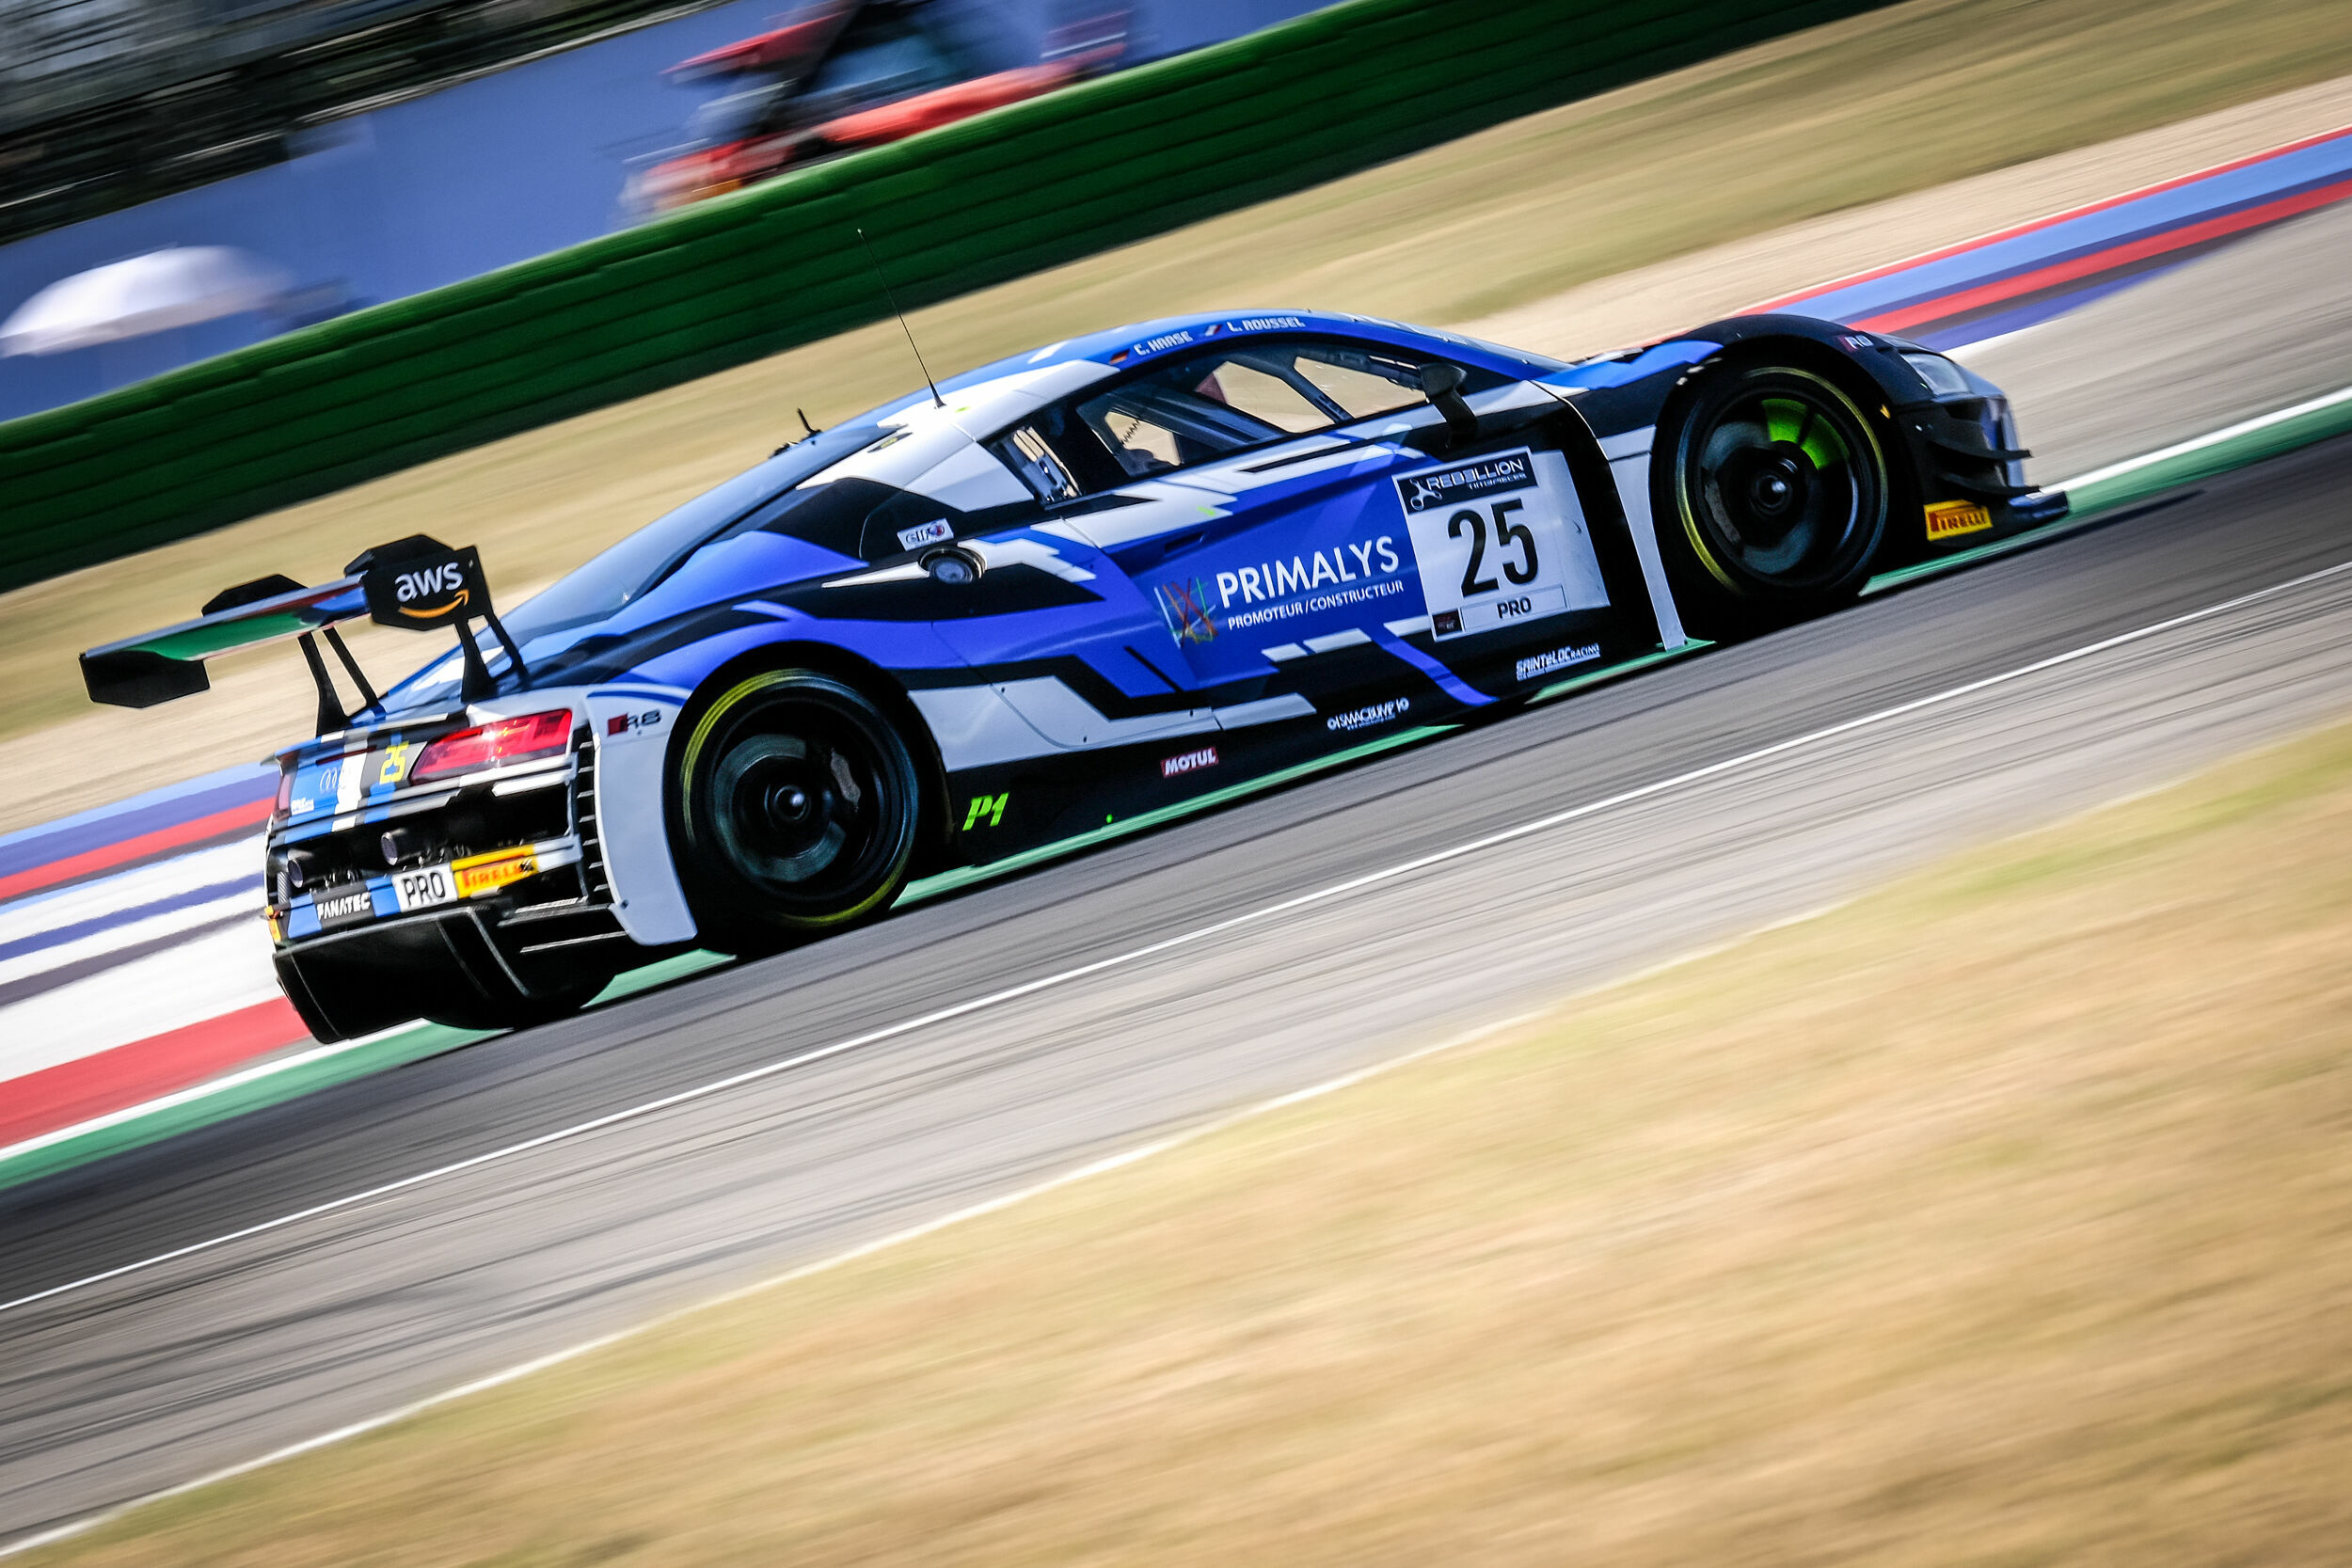 Fanatec GT World Challenge Europe powered by AWS Sprint Cup 2021